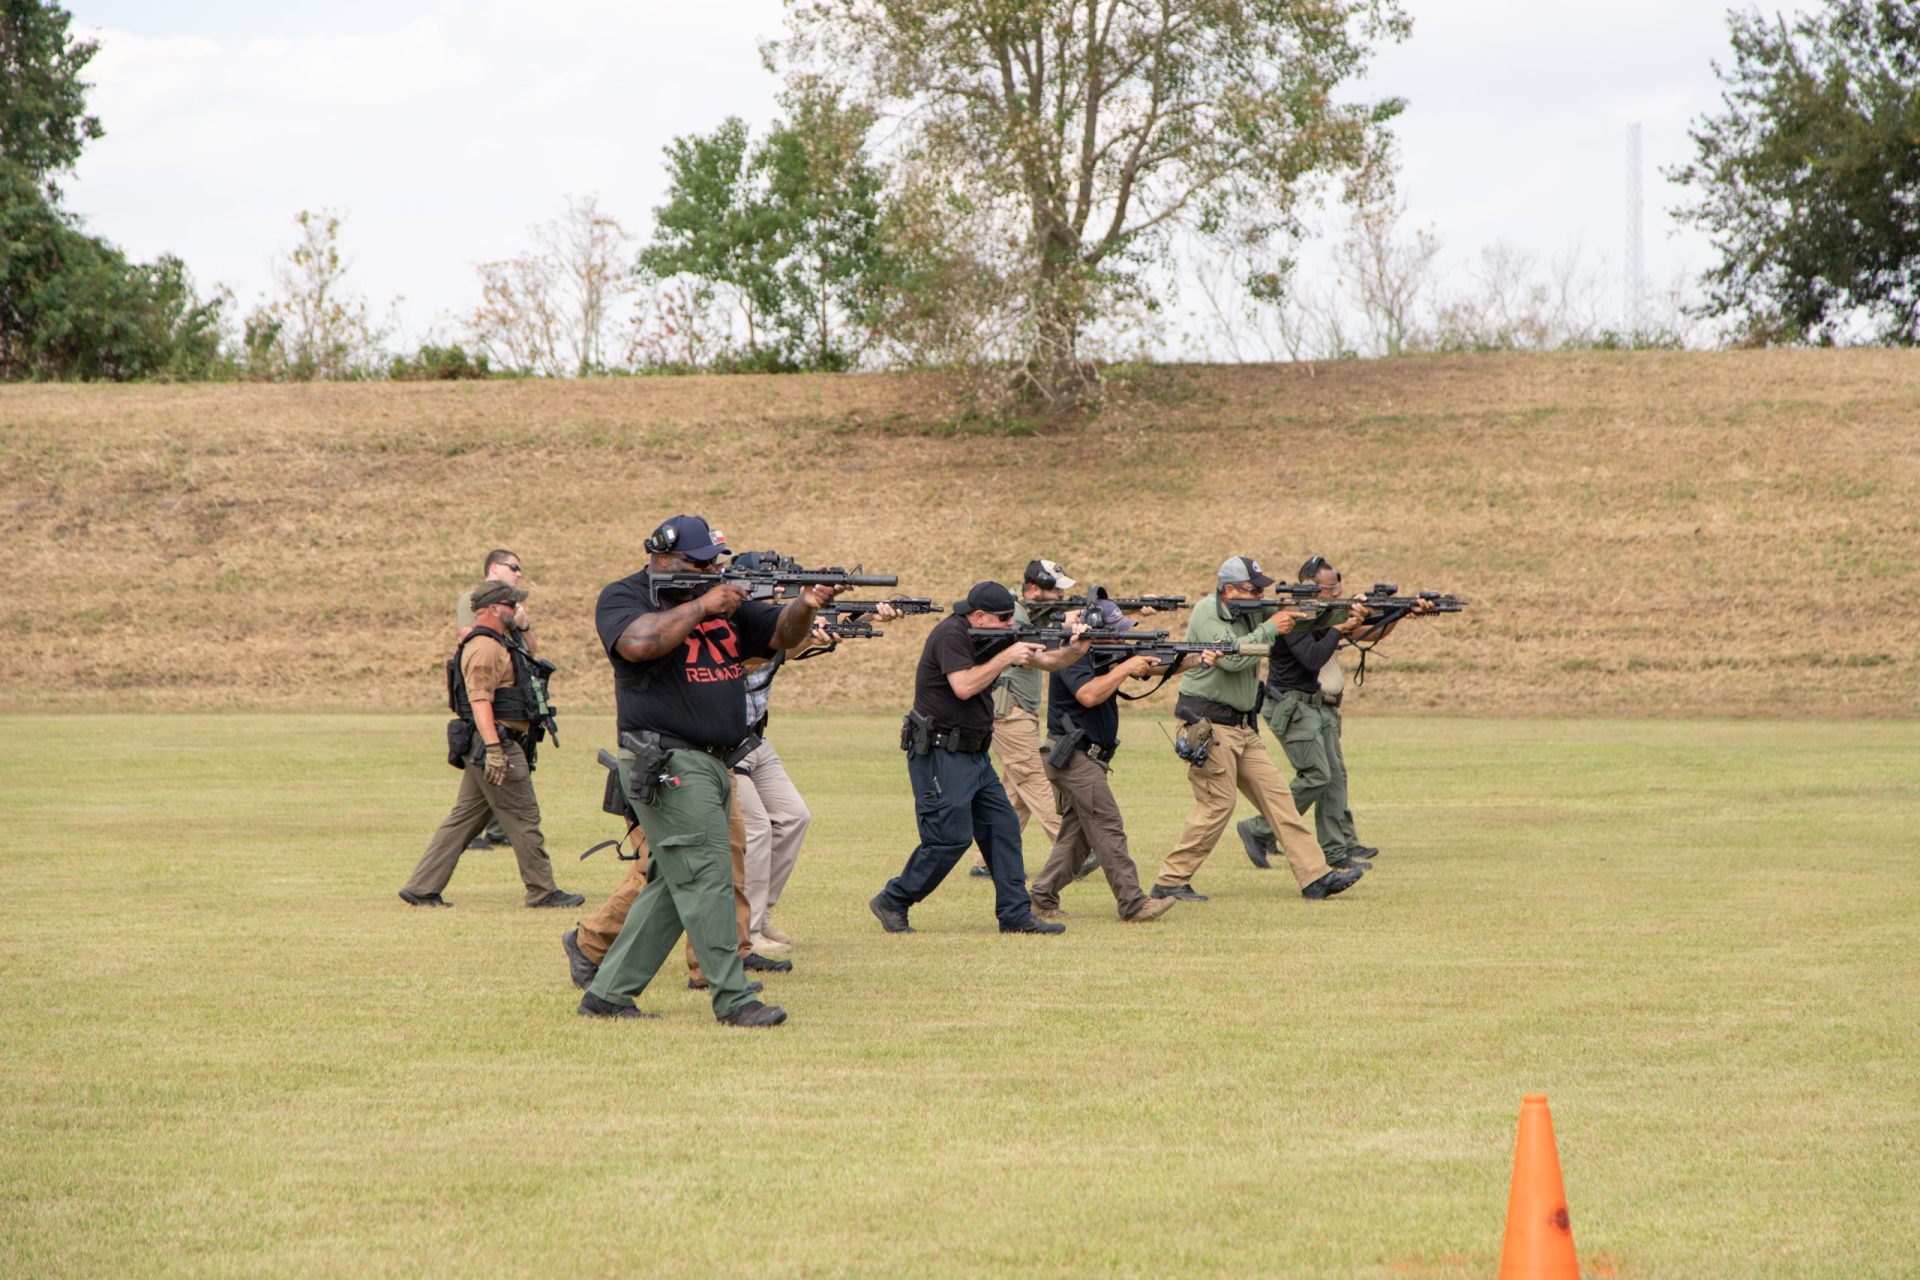 Police range training course with AR15 rifles